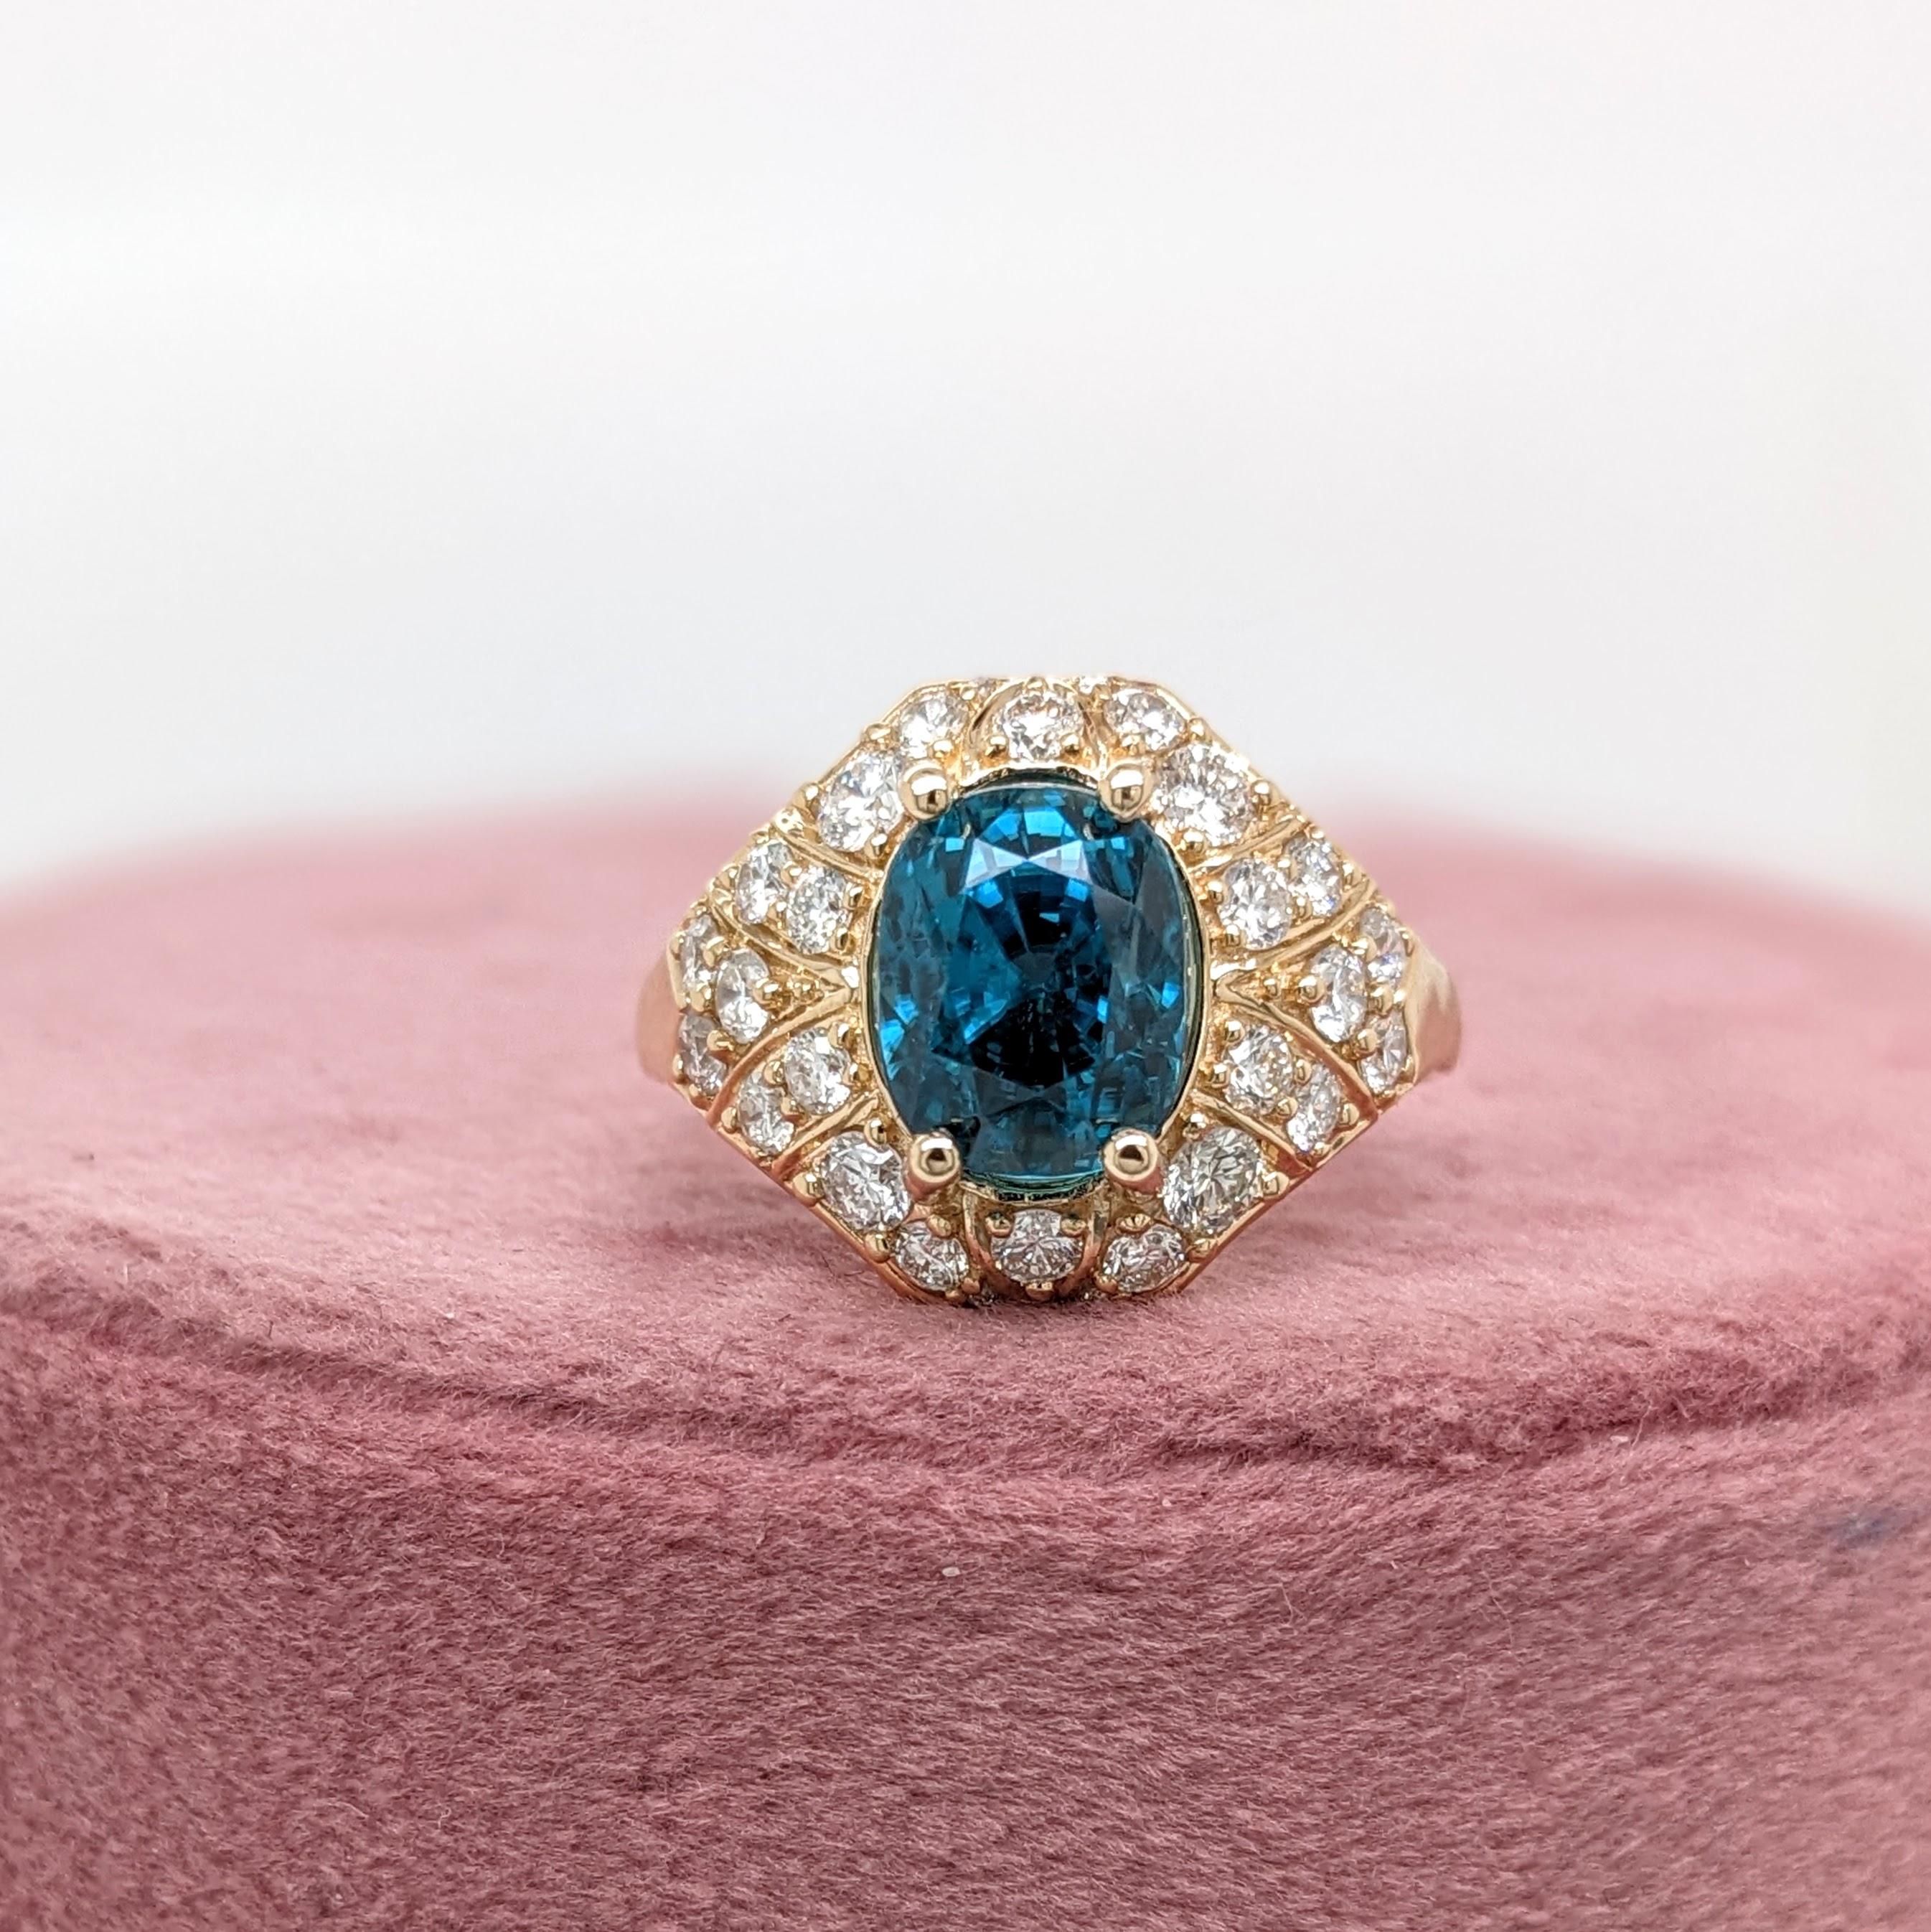 Claim this captivating natural blue zircon for yourself or your loved ones! A masterpiece of nature set in 14K yellow gold with natural diamonds. A gorgeous ring for a modern bride, a December baby, or a lover of things blue and sparkly!

In the